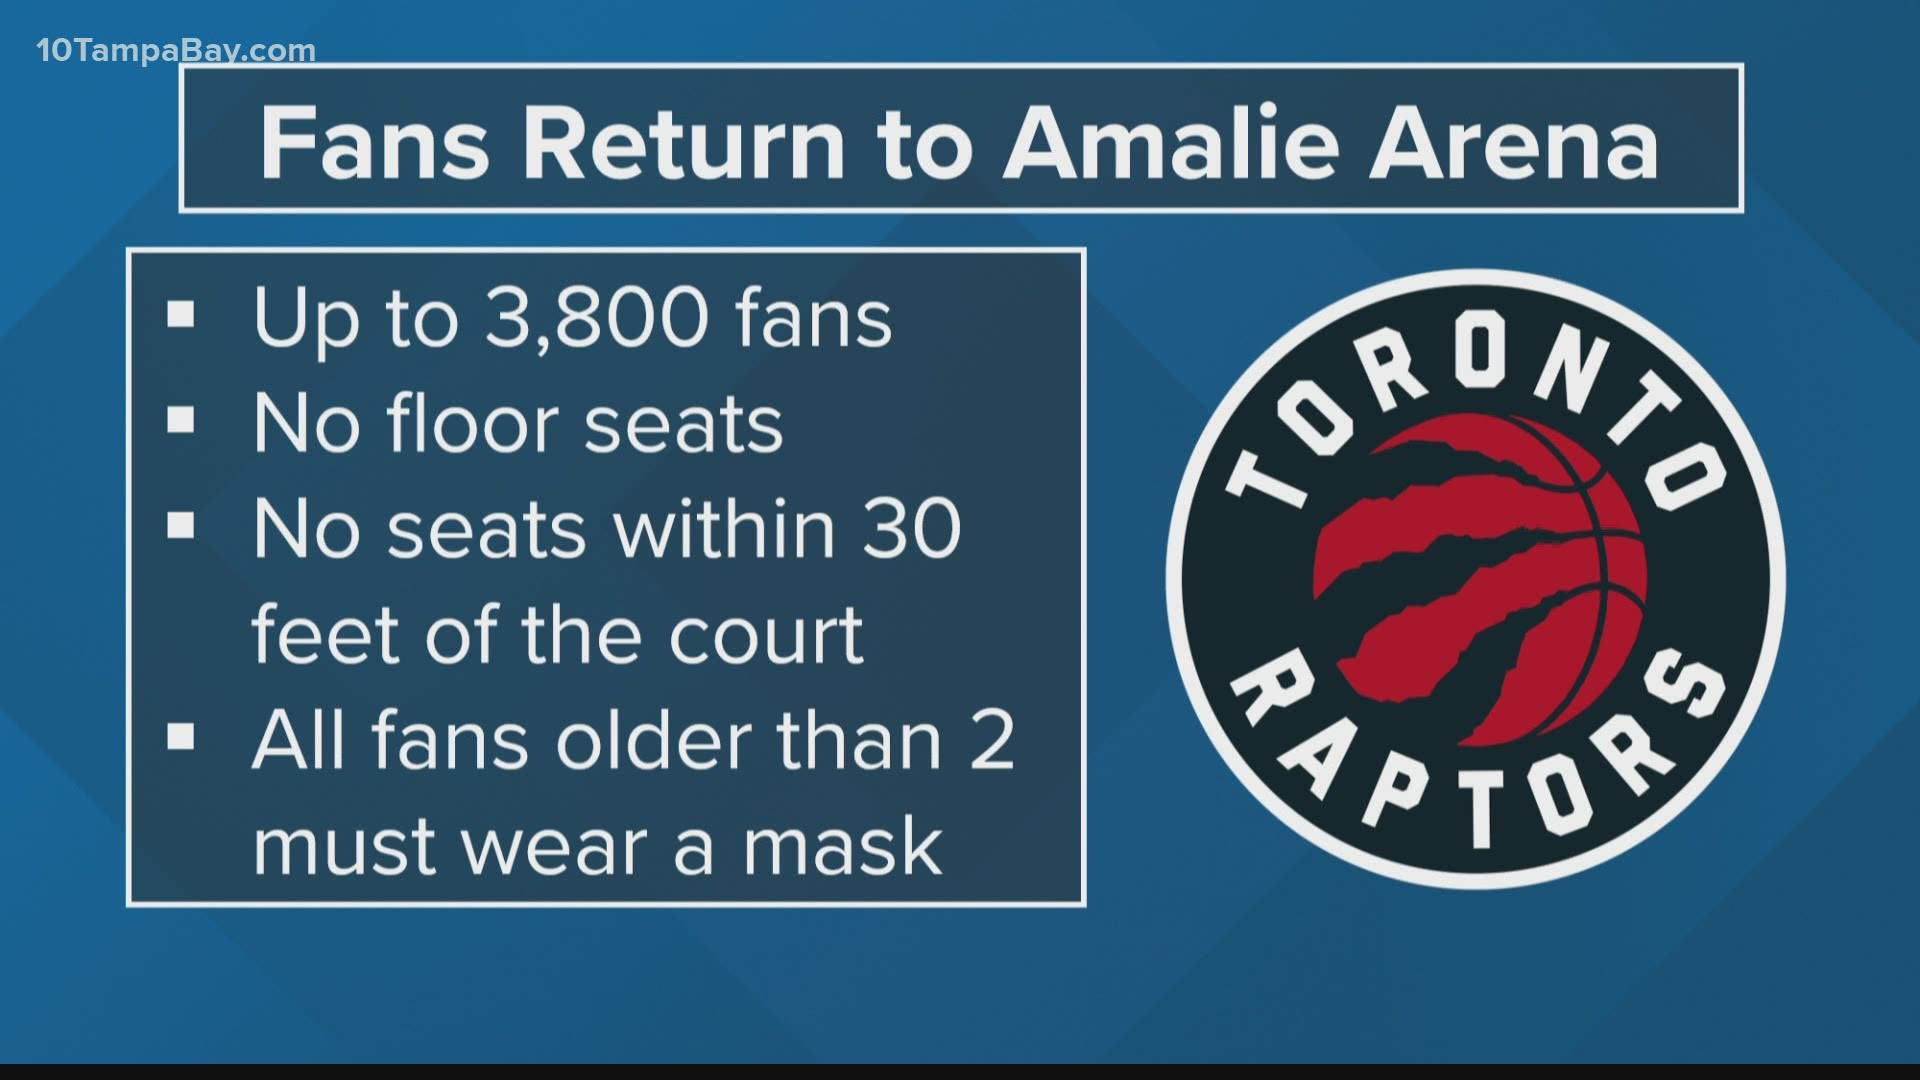 The Raptors will increase available seating to 3,400 fans once the regular season begins and through the end of January.